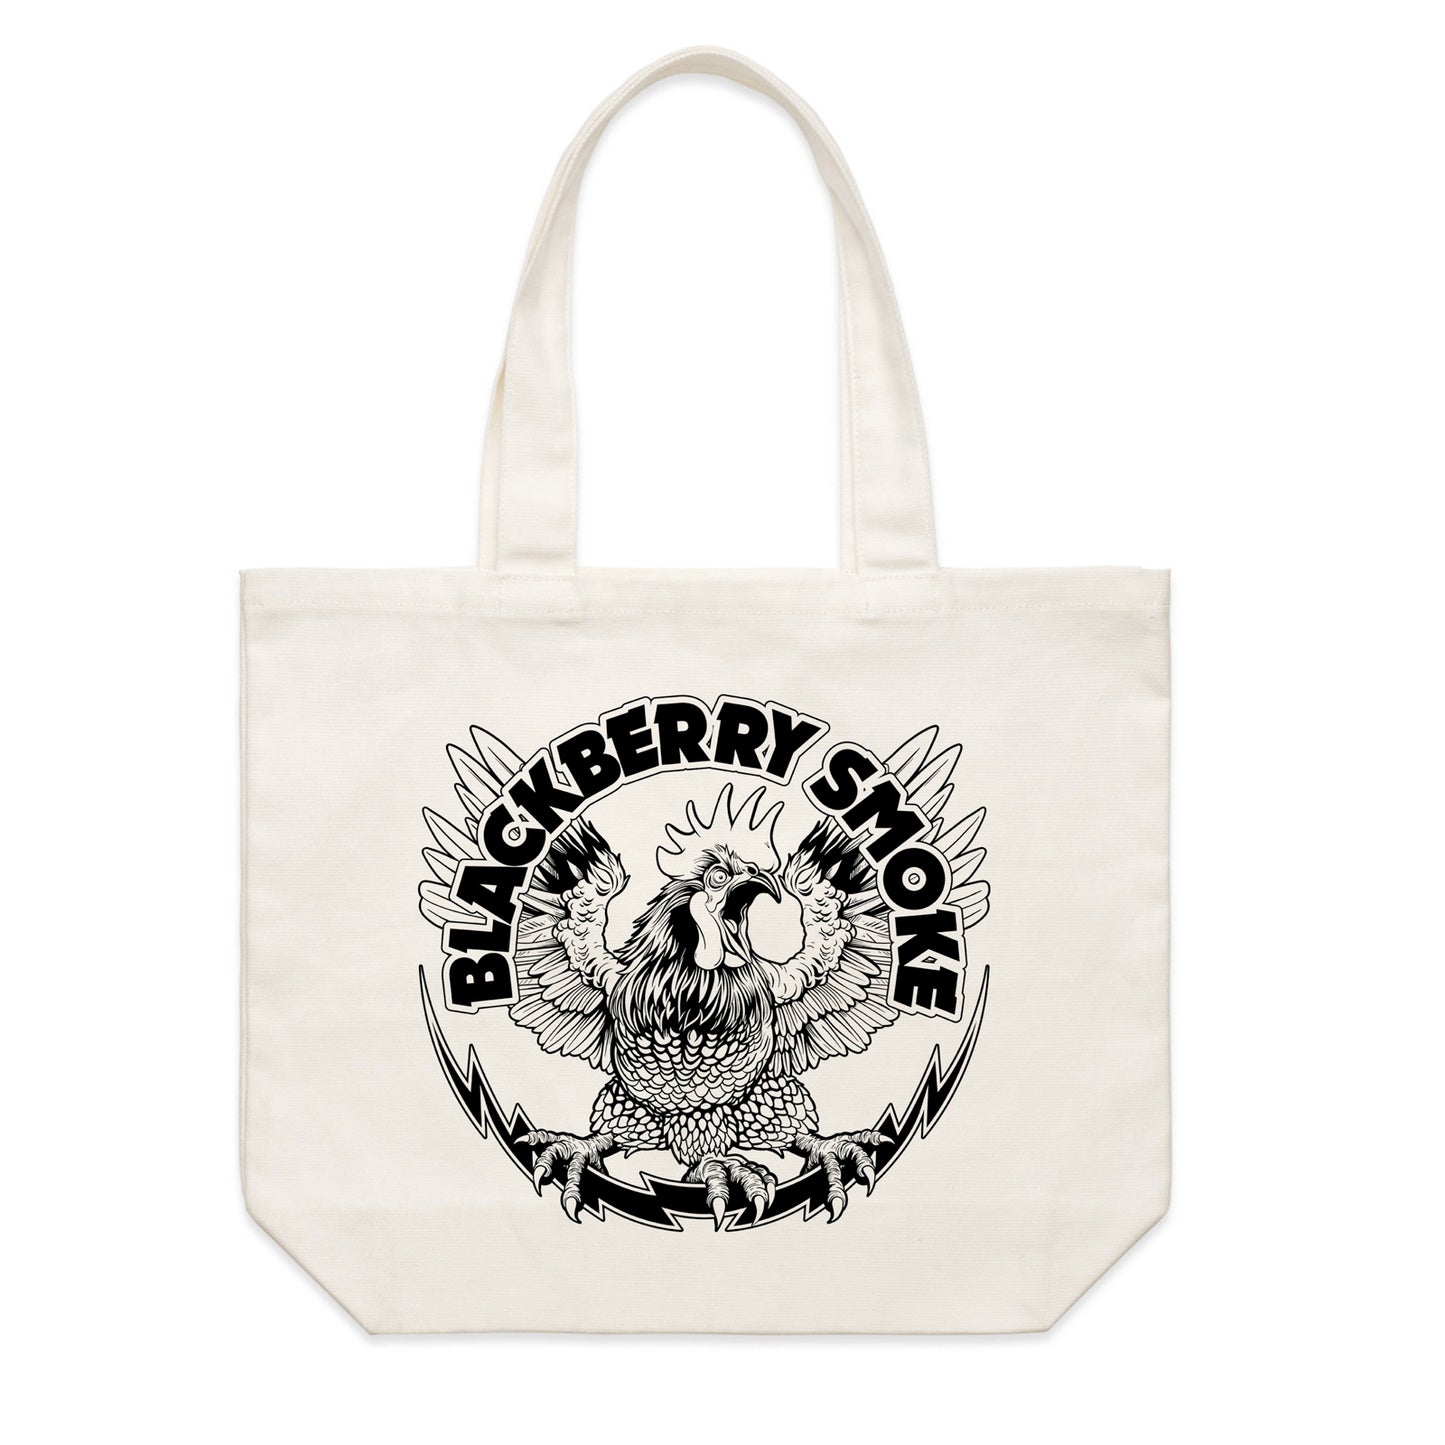 Premium Quality Cotton Lightning Rooster Tote